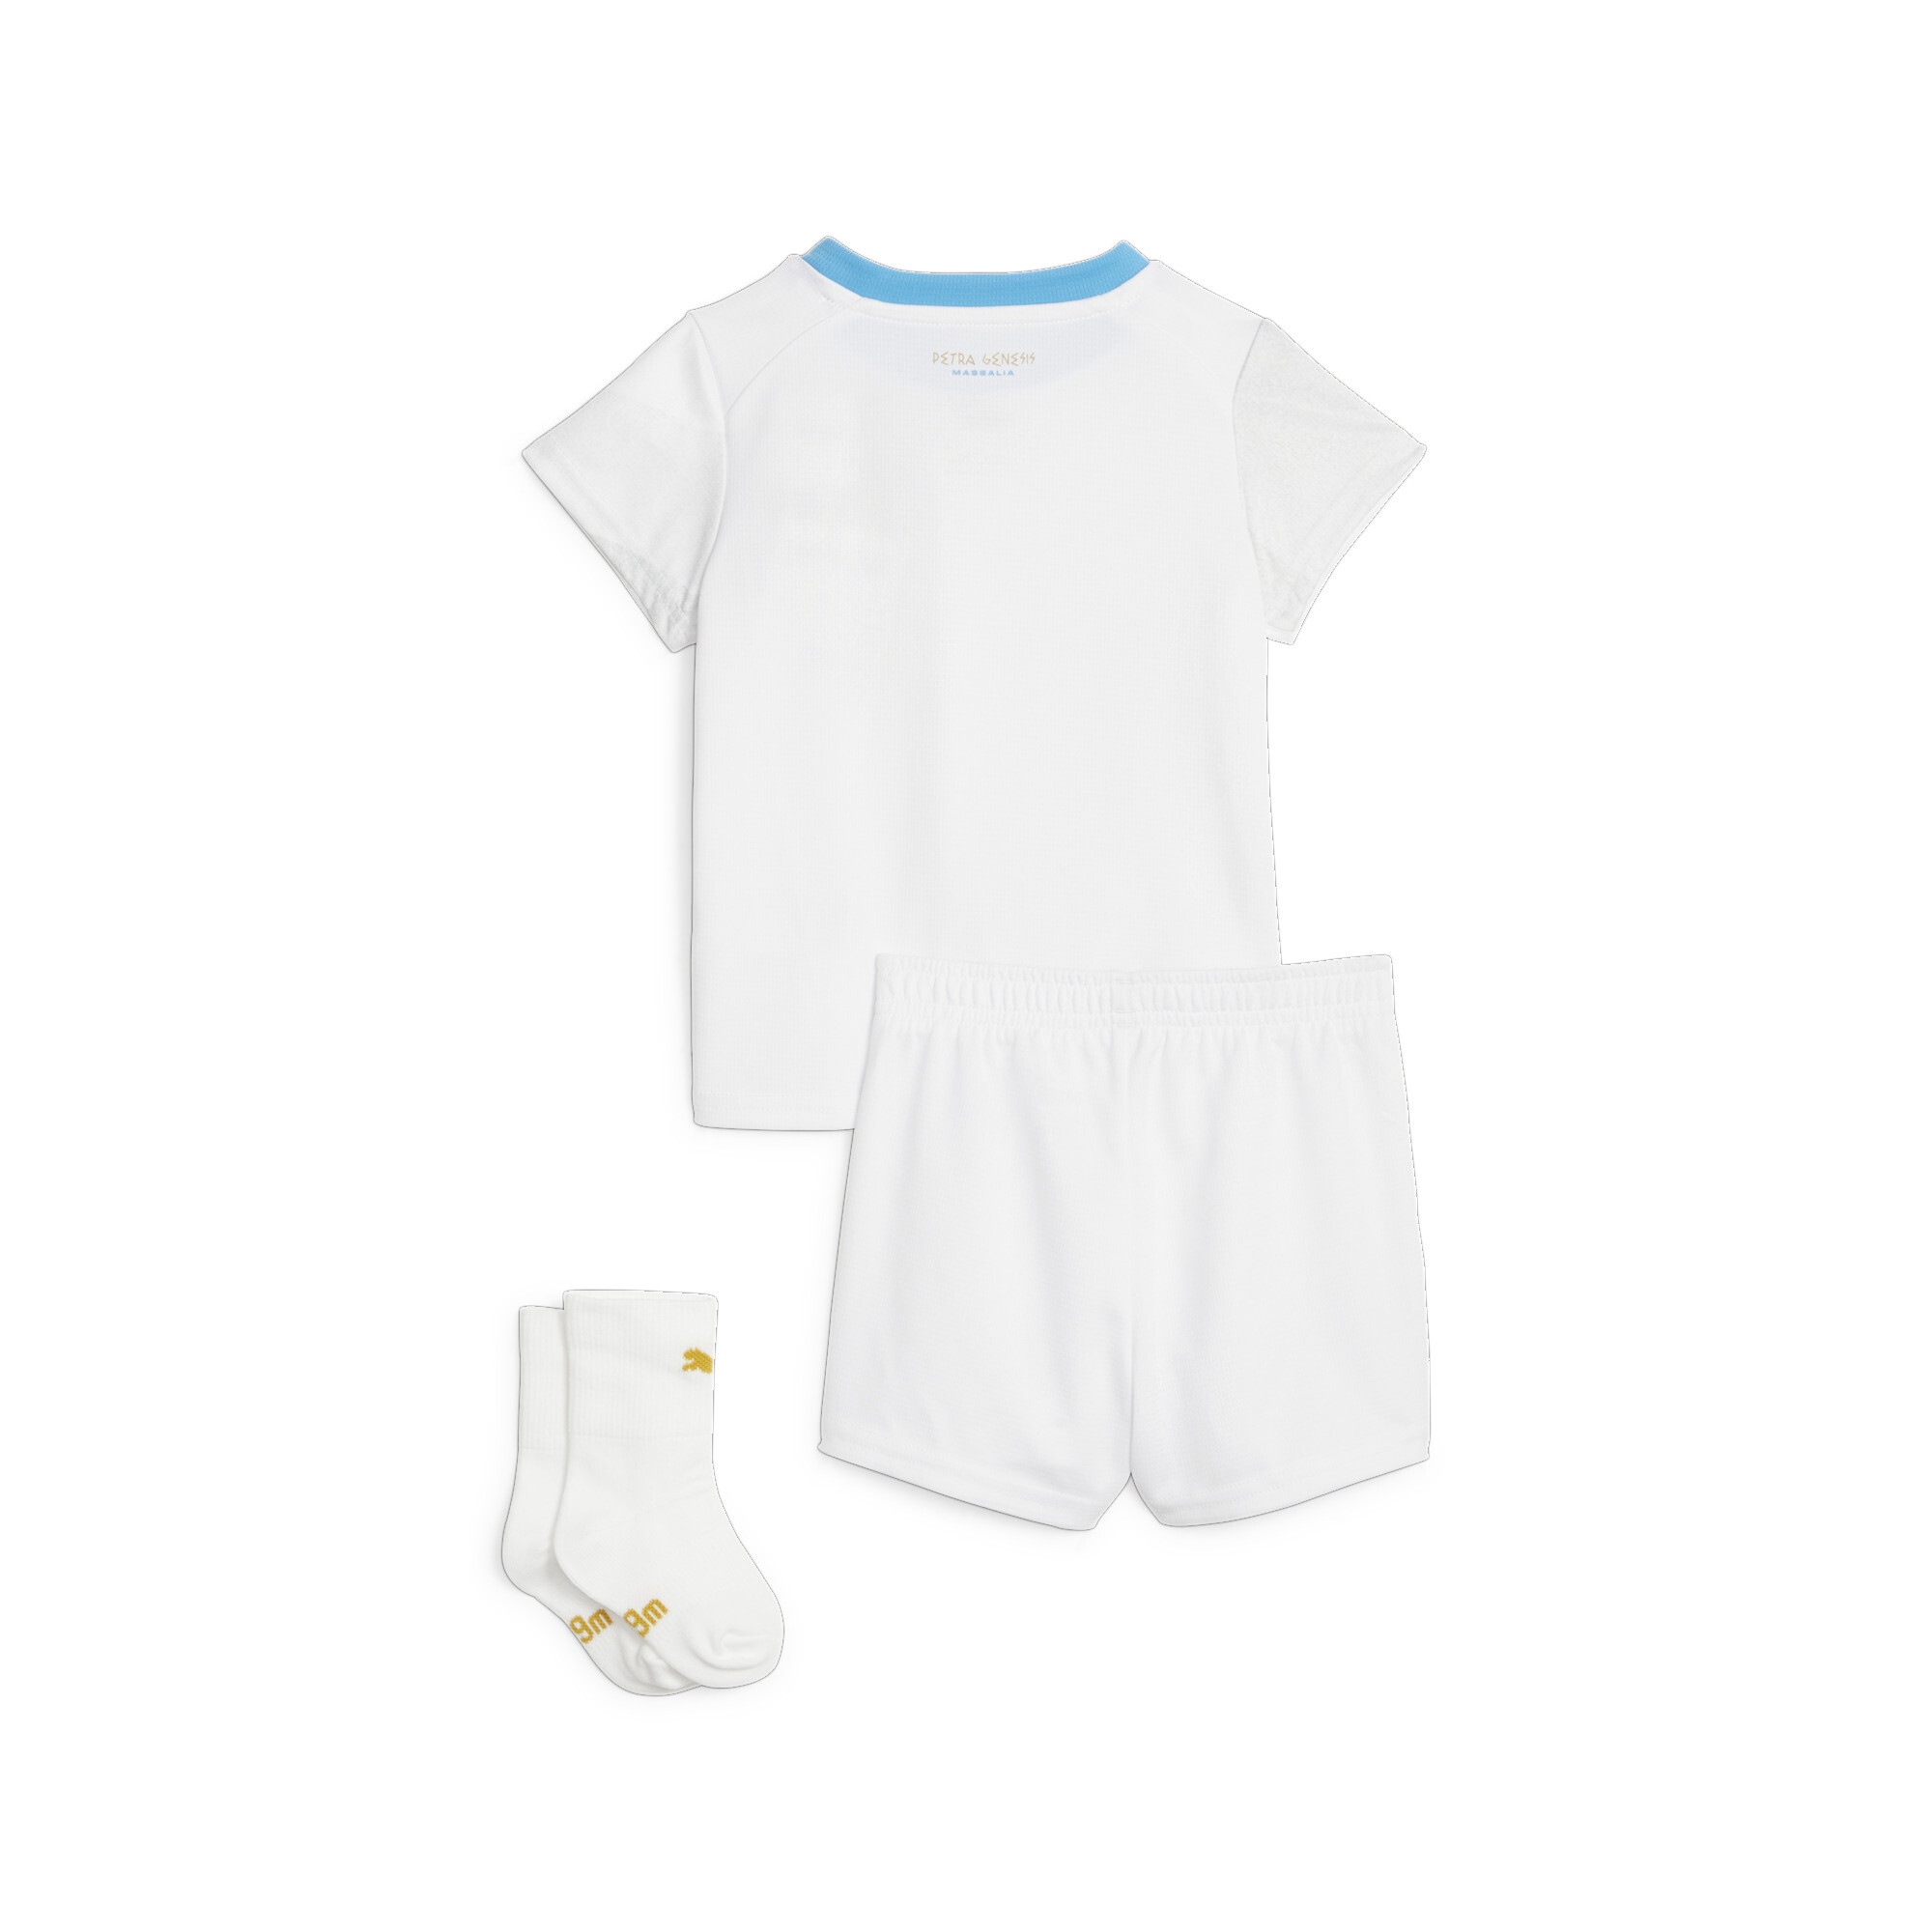 Puma Olympique De Marseille 23/24 Home Baby Kit, White, Size 1-2Y, Clothing